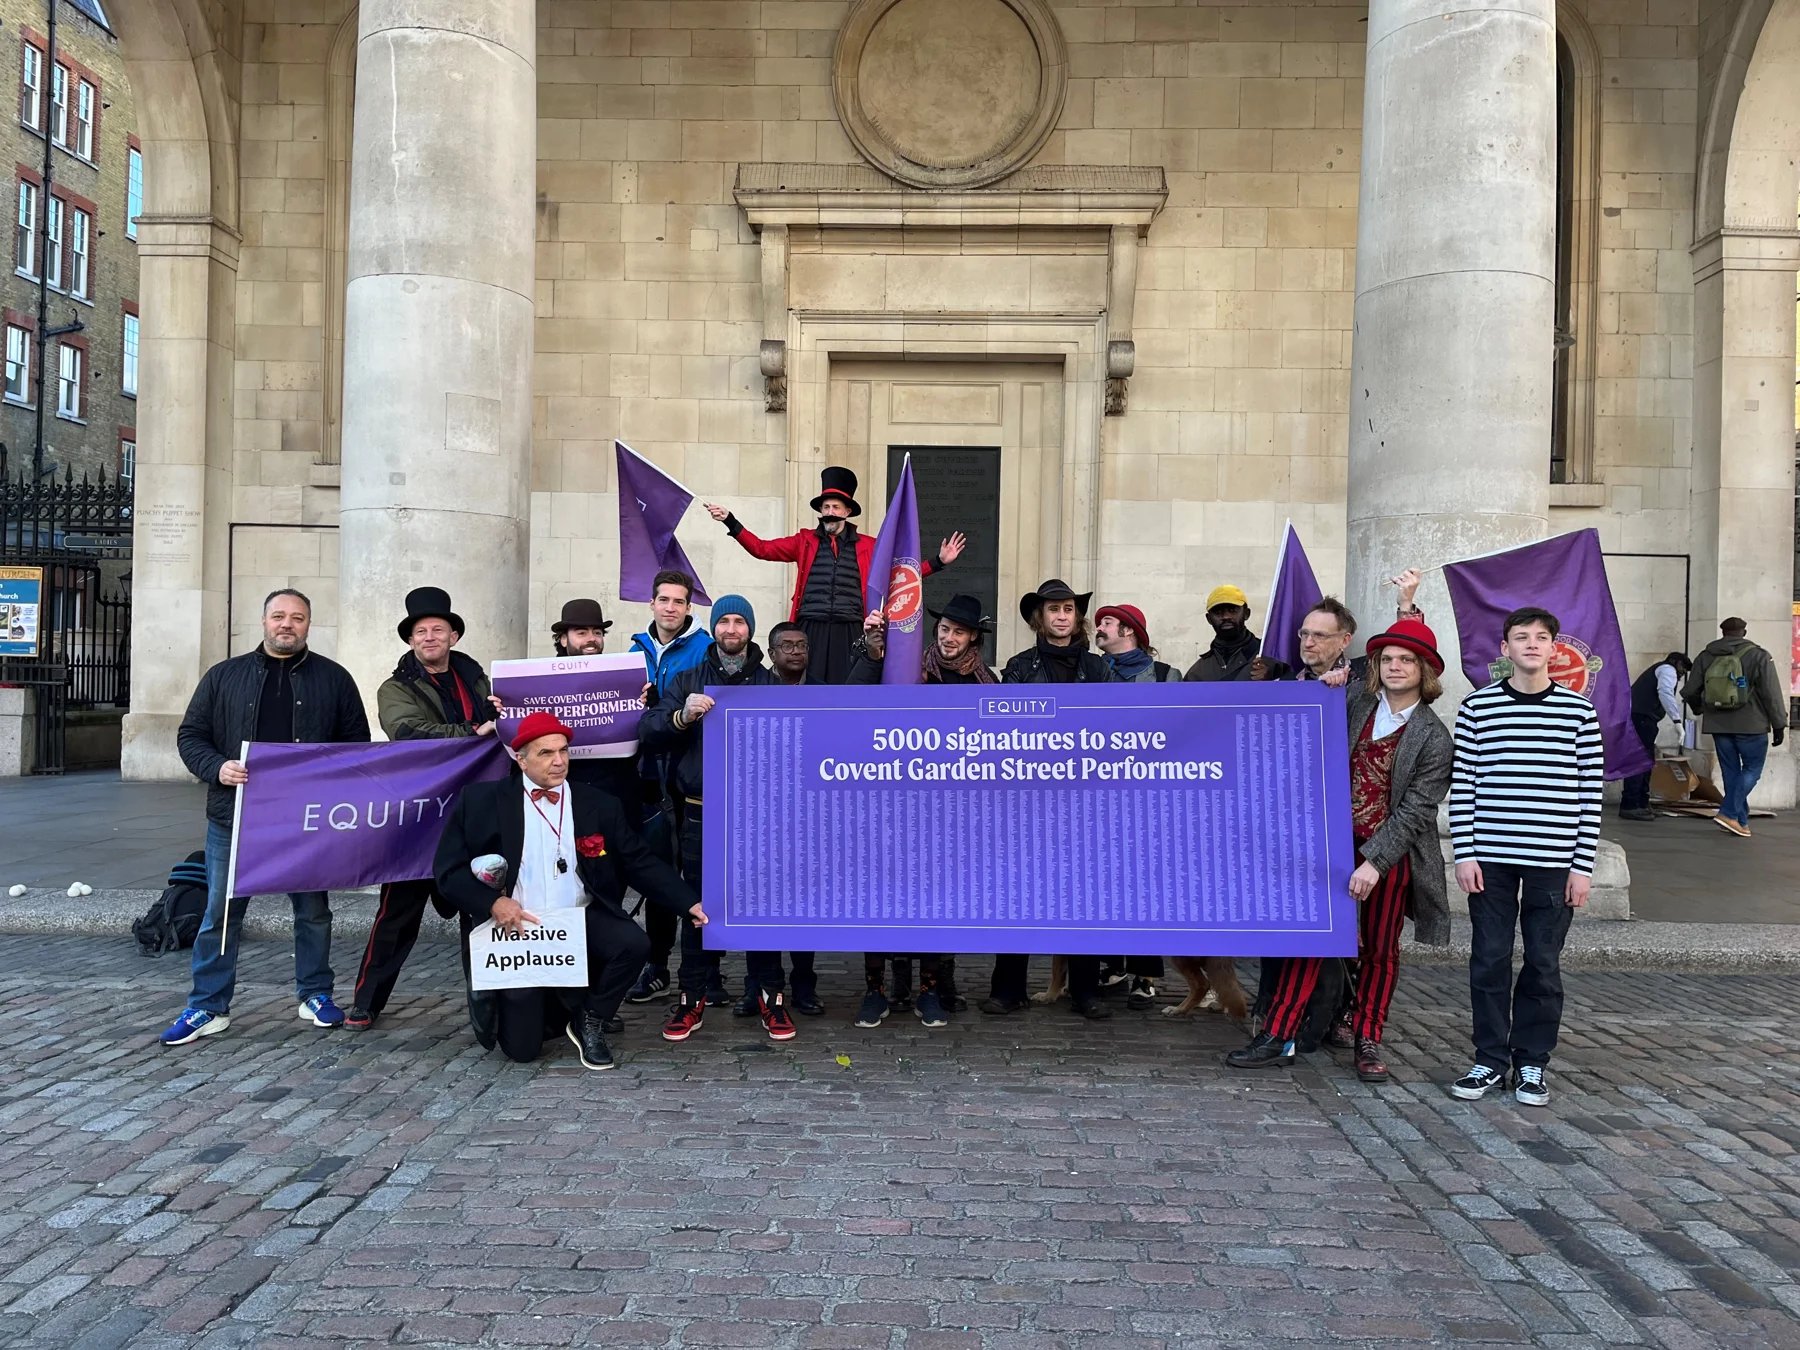 image shows group of around 20 Street Performers holding purple equity flags and a large petition of 5000 signatures printed on a large purple banner, outside St Paul's Church Covent Garden